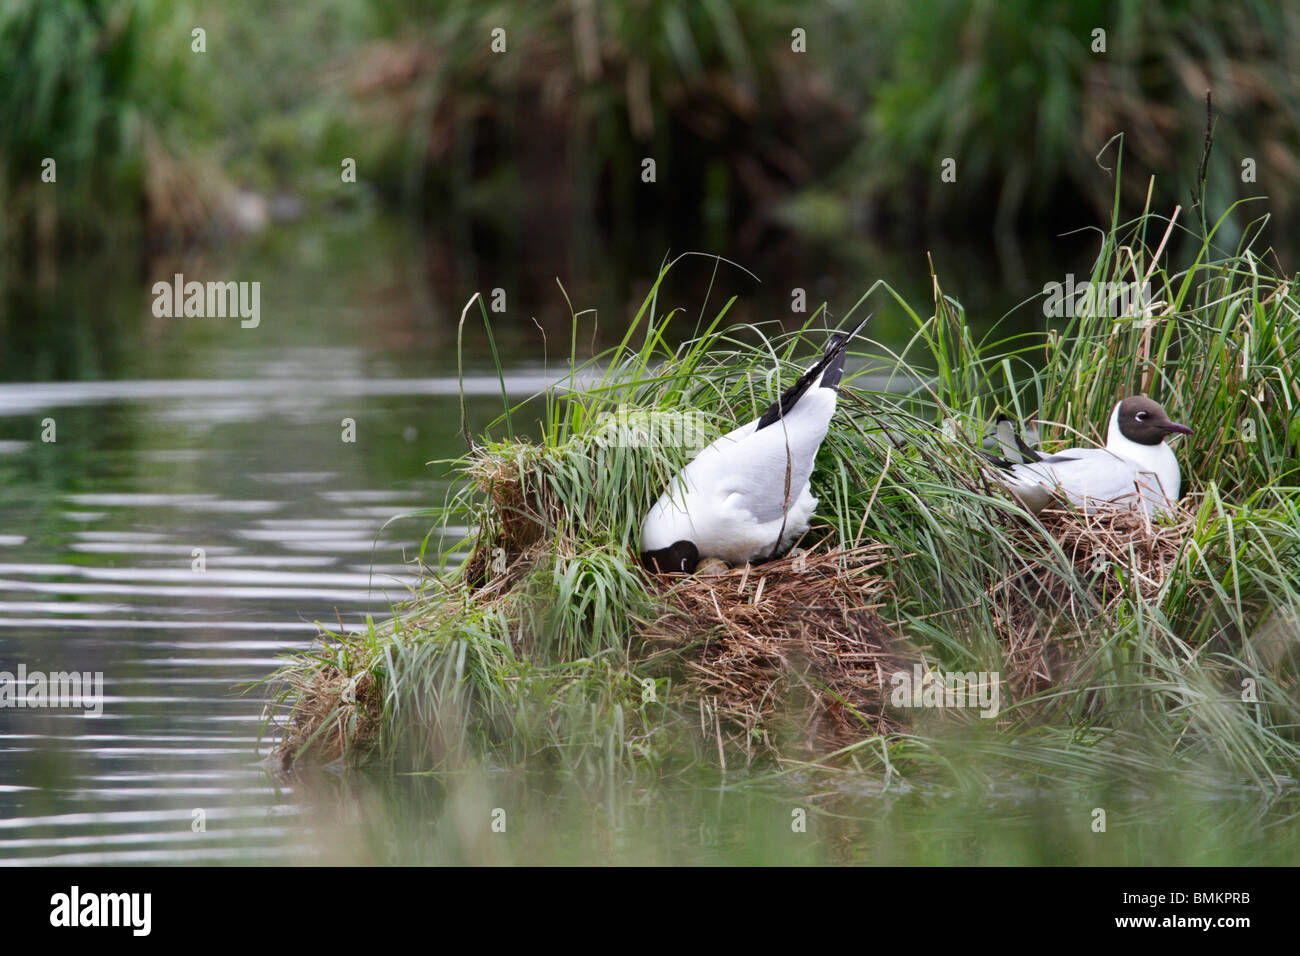 Black-Headed gulls breeding. The parent is turning the eggs in the nest. This was taken at the Grosser Russweiher, Germany Stock Photo